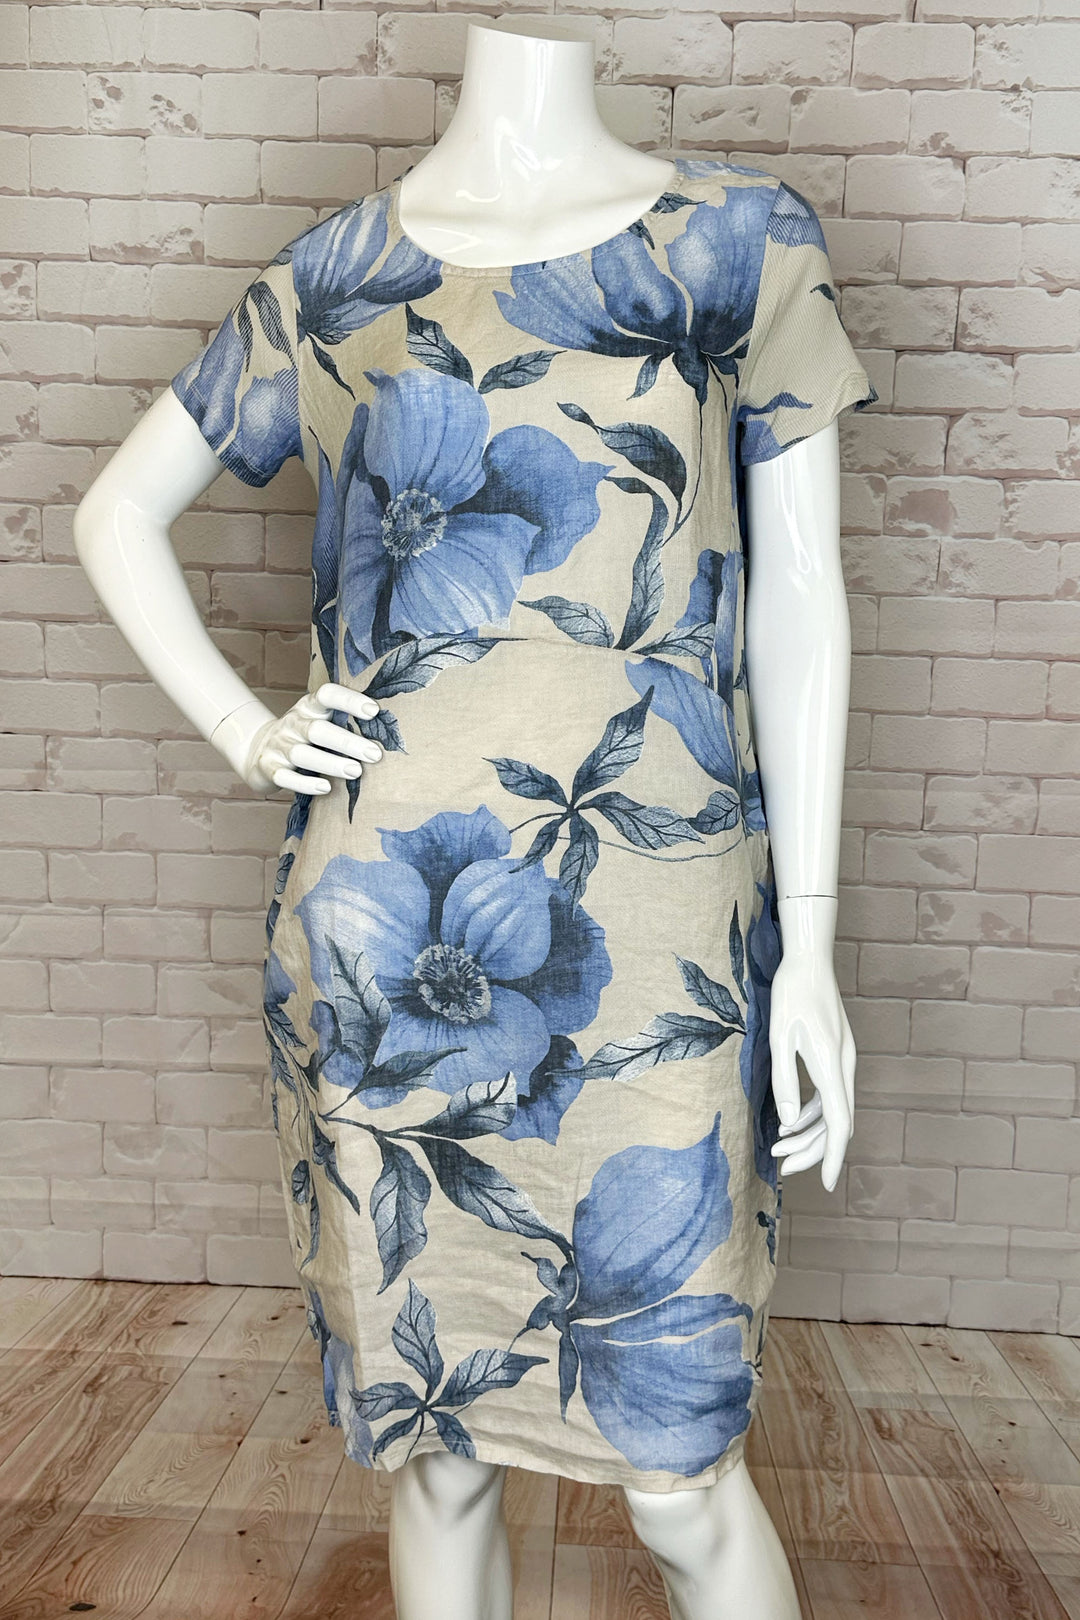 Featuring a lovely floral pattern and chic short sleeves with rib knit detailing, this dress is both fashionable and comfortable.